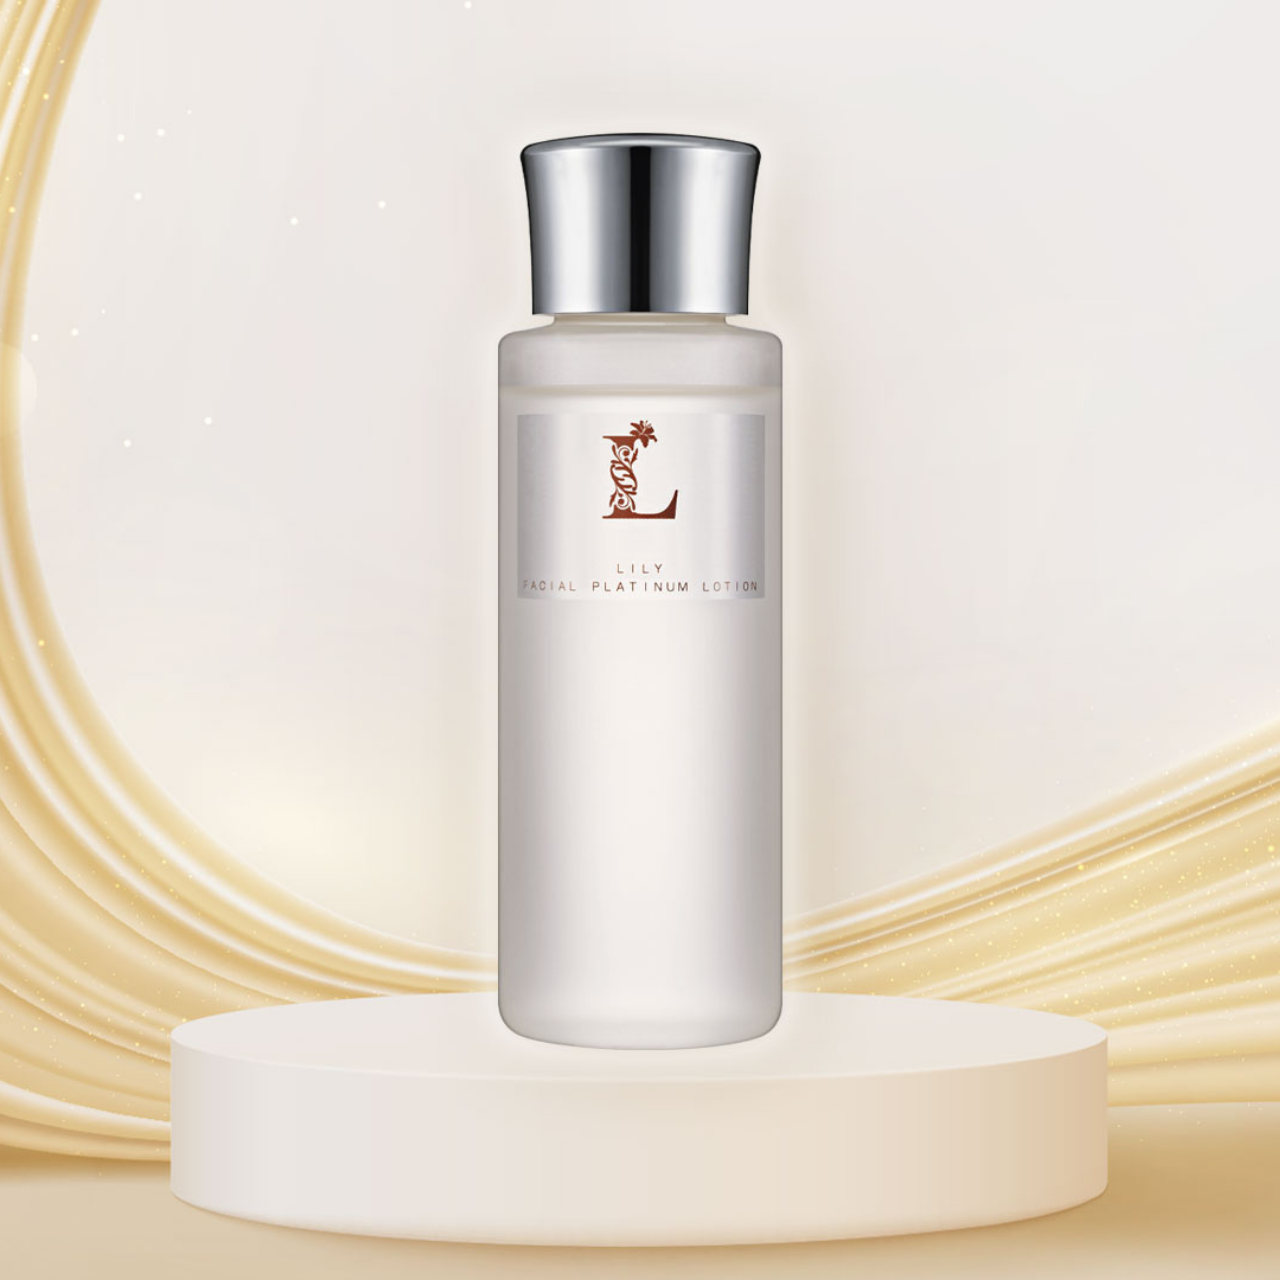 LILY FACIAL PLATINUM LOTION – Lily